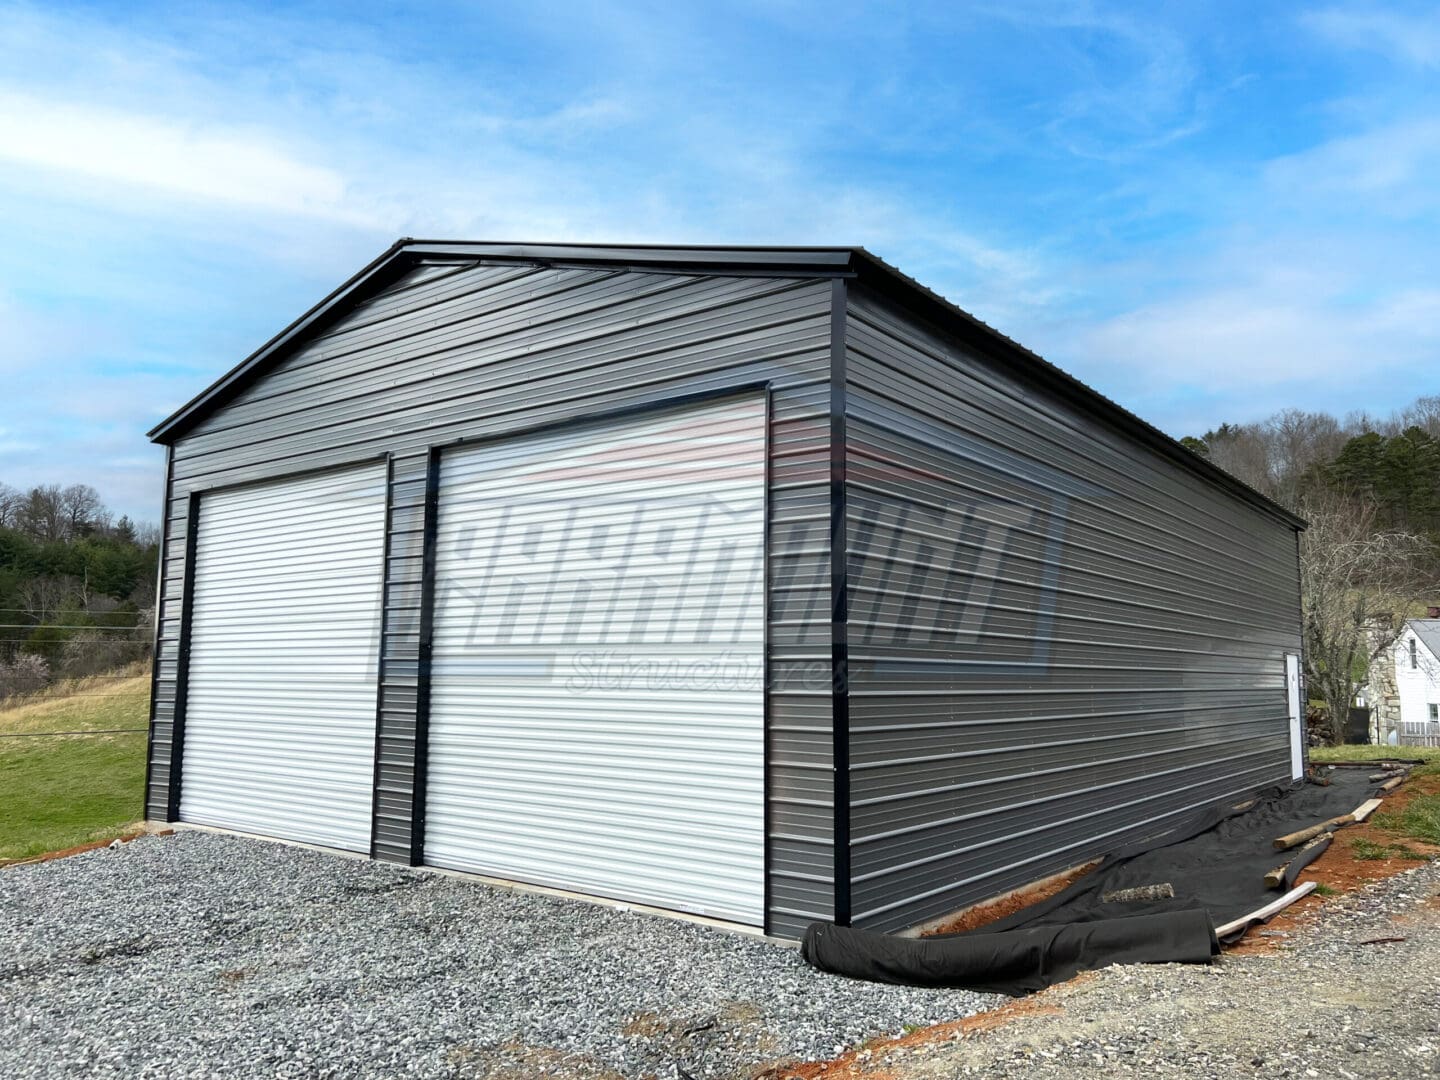 A large metal garage with two doors and a roll up door.